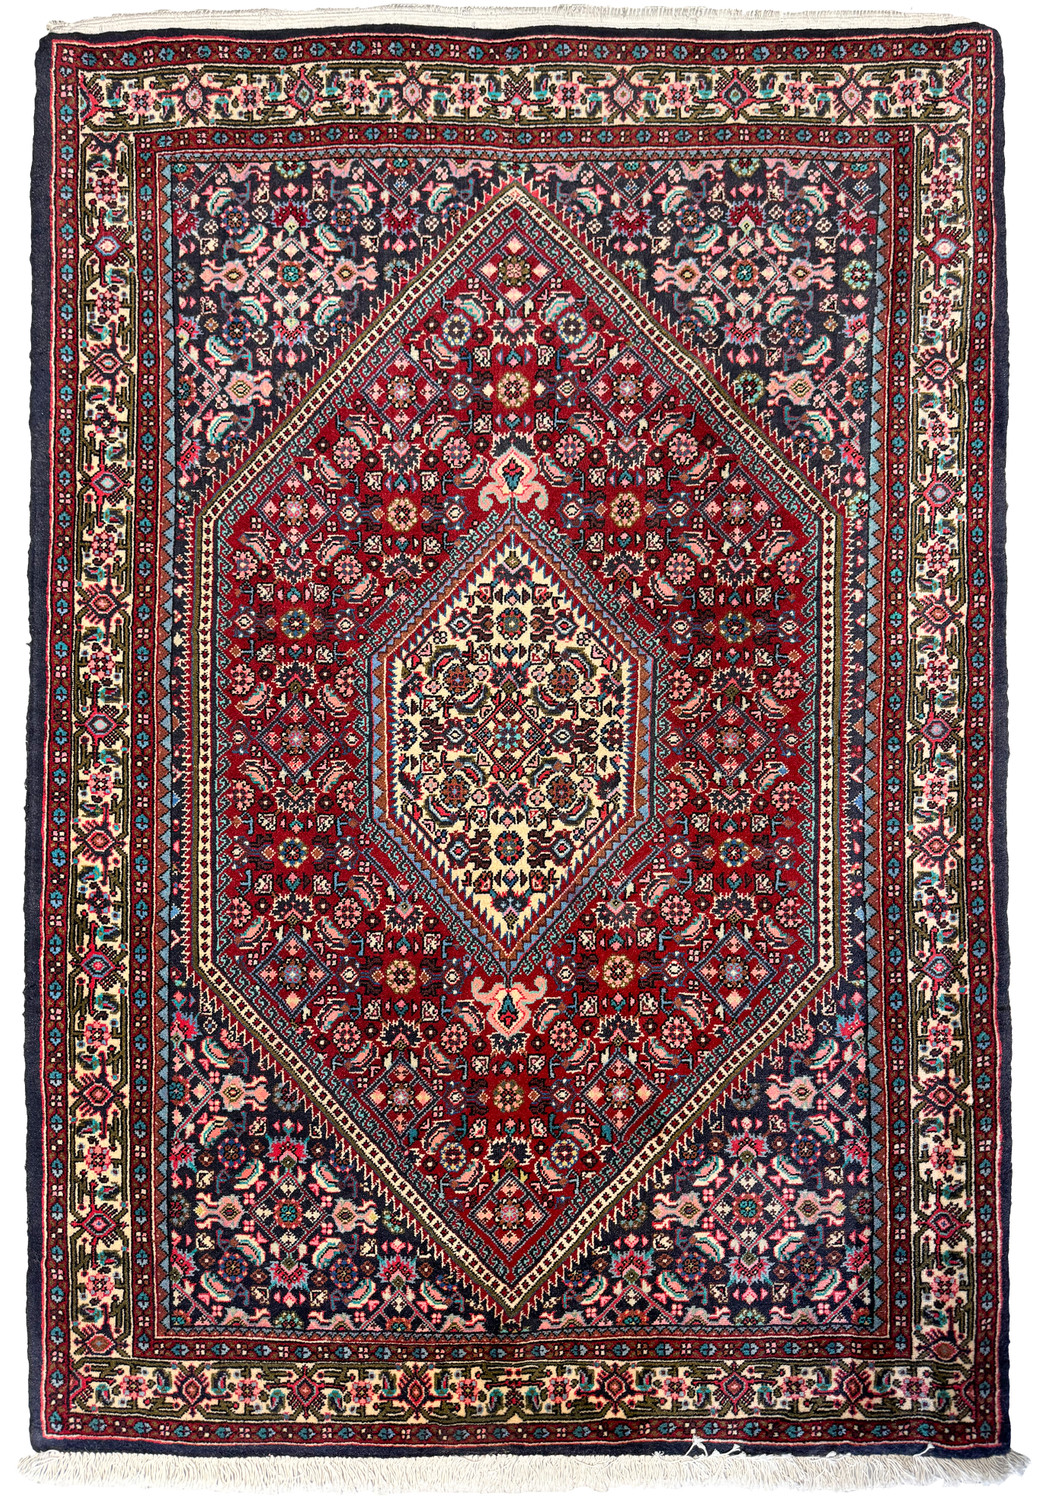 Overhead view of a 3'2" x 4'7" Persian Bijar Rug, showcasing the rich crimson field and detailed patterns